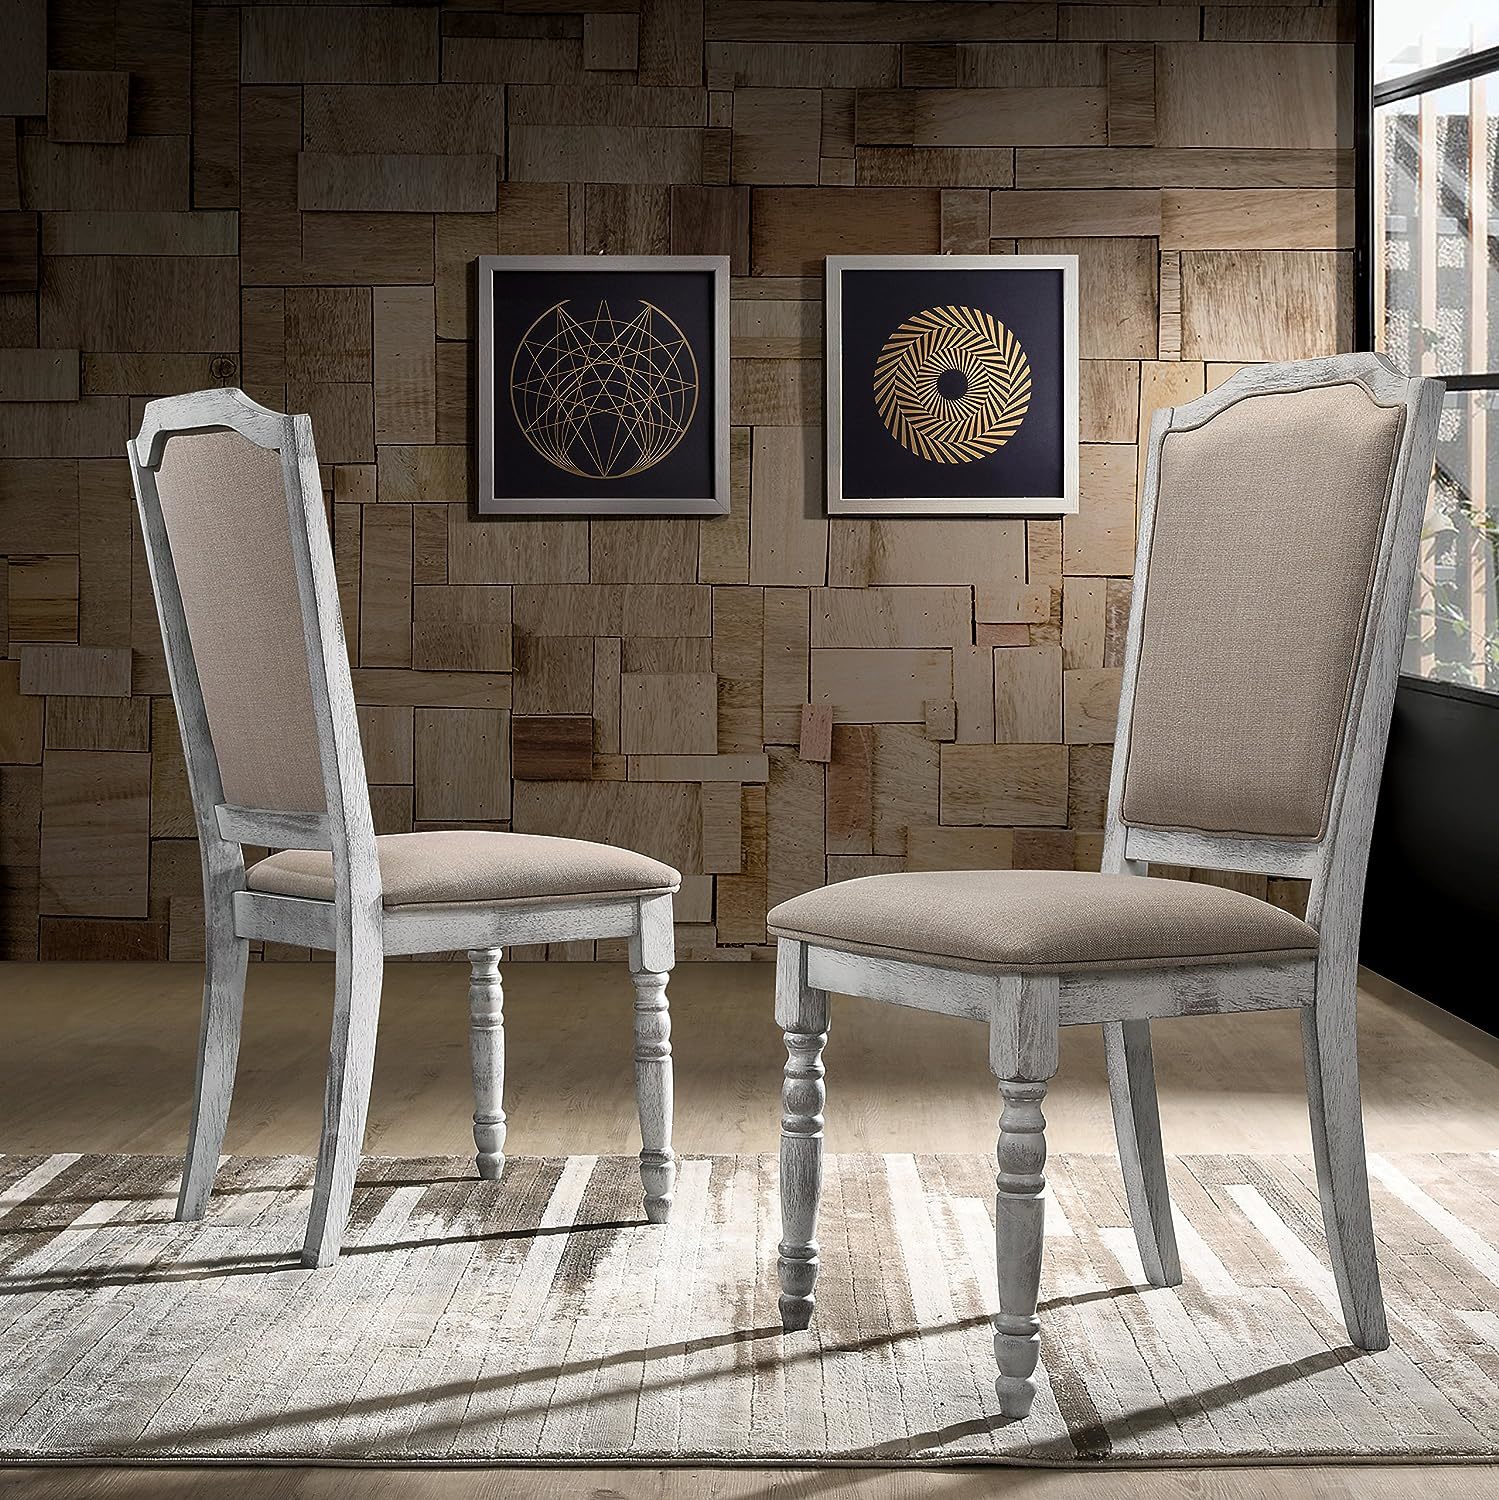 Iris Turned Leg Wood Dining Chairs By Roundhill Furniture, Set, Weathered White. - $194.95